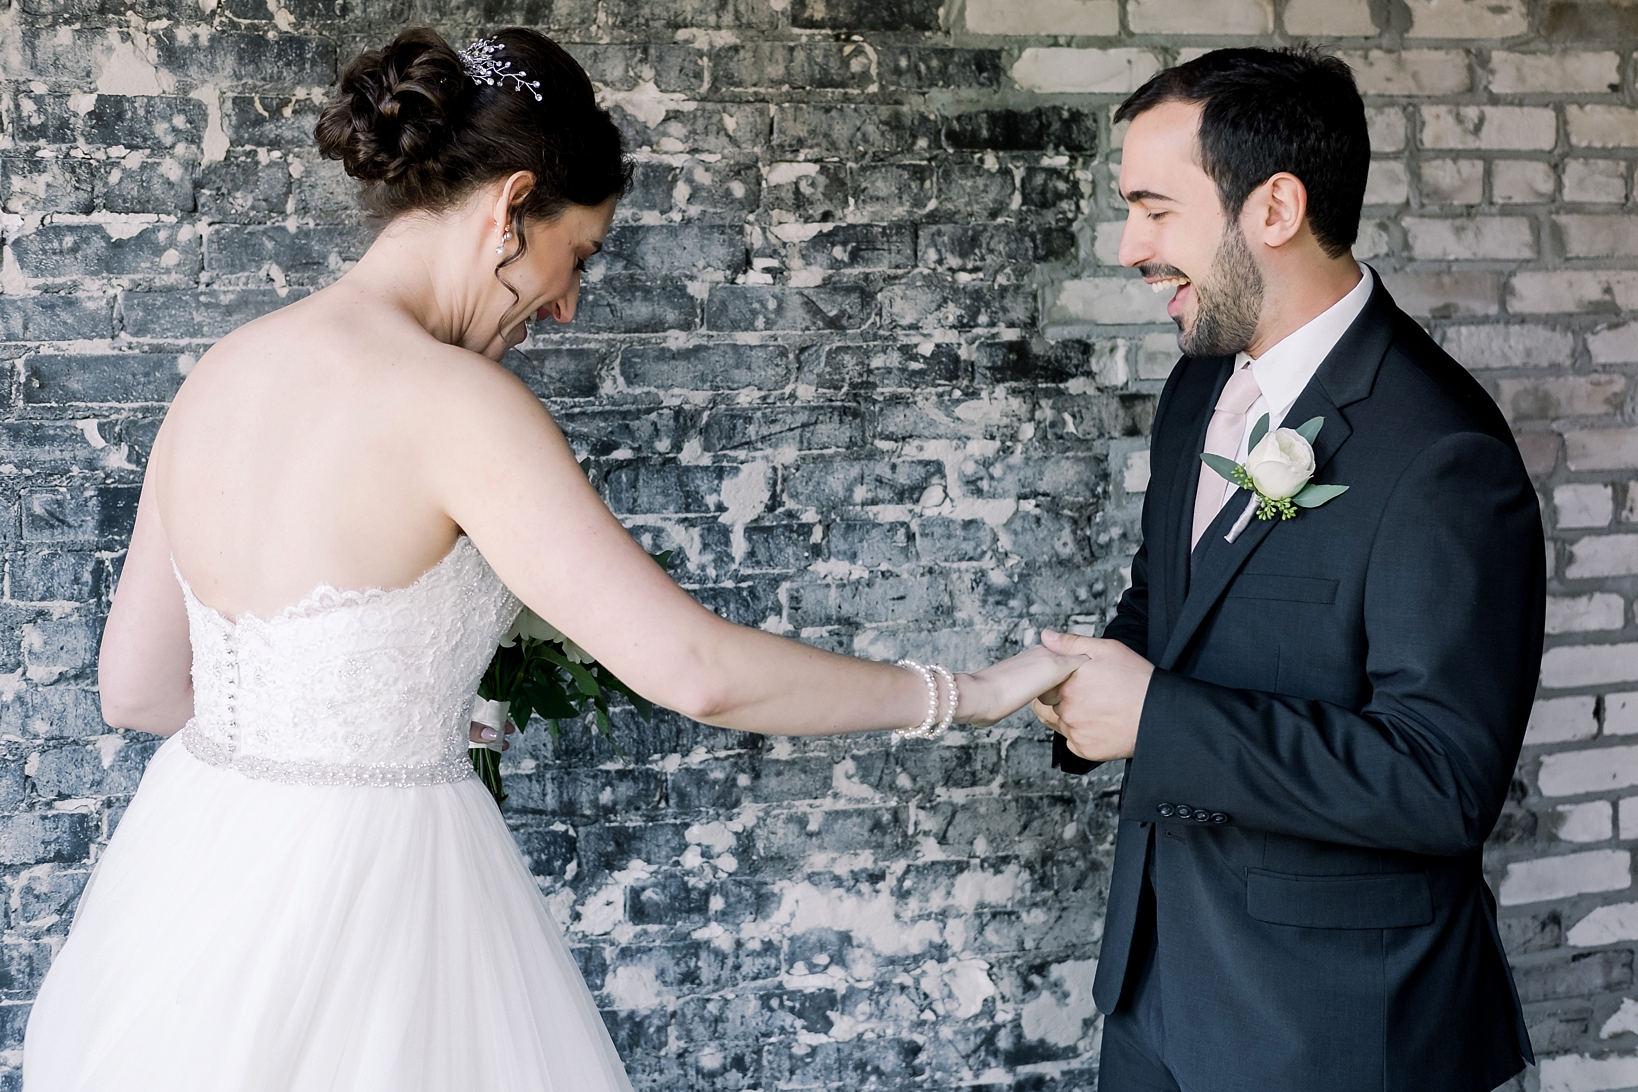 The Groom smiles from ear to ear as he sees his Bride to be for the first time on his elegant oxford exchange wedding day